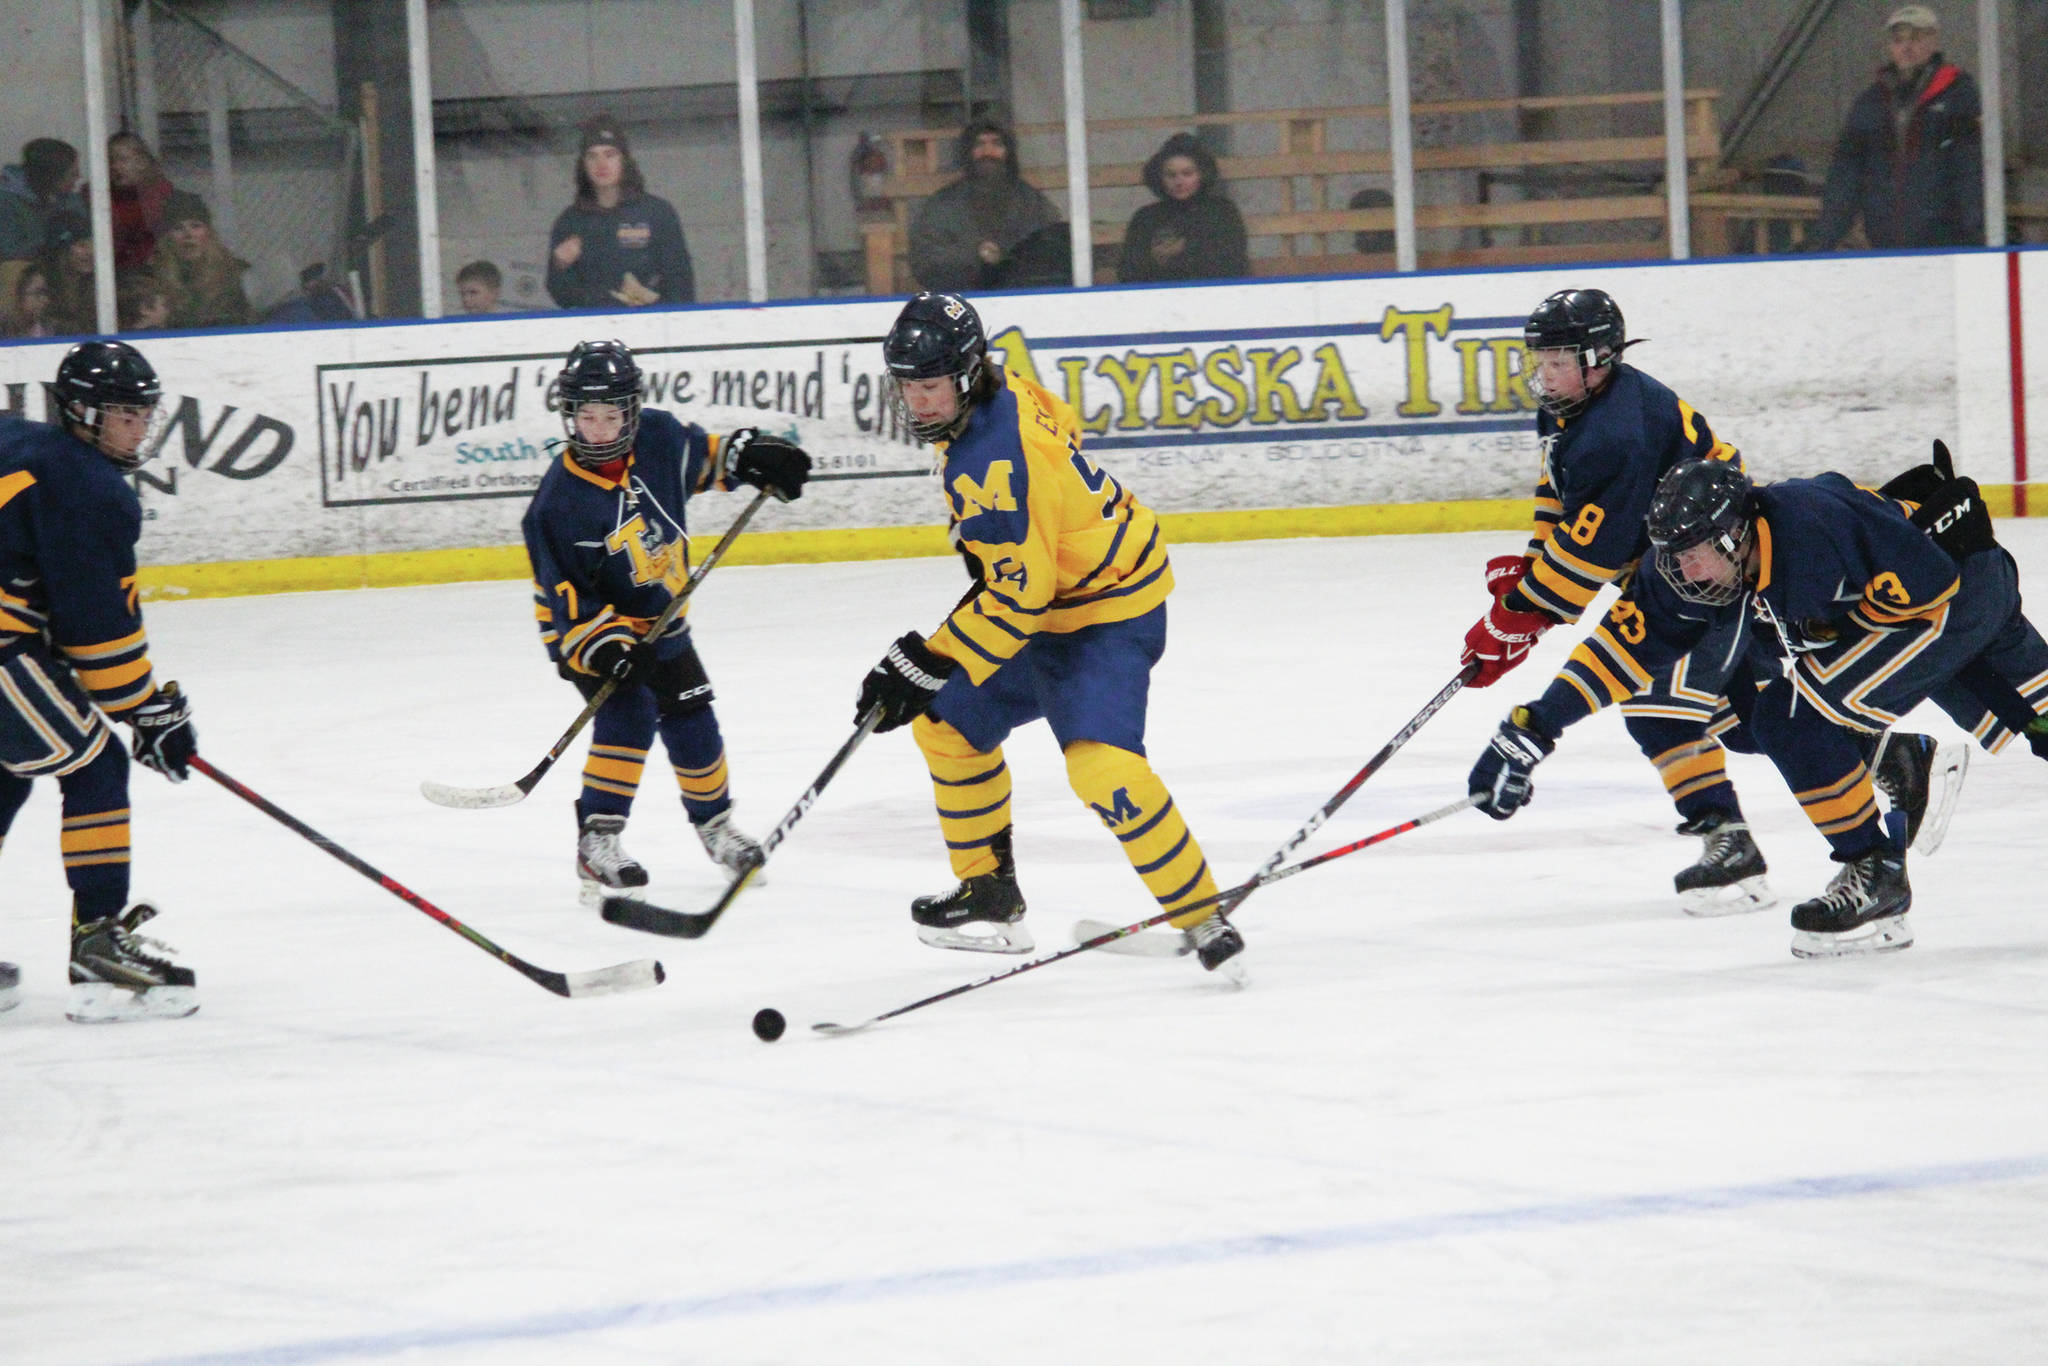 Homer’s Phinny Weston tries to control the puck among a group of Tri-Valley School players during a Thursday, Jan. 30, 2020 hockey game at the Kevin Bell Arena in Homer, Alaska. (Photo by Megan Pacer/Homer News)